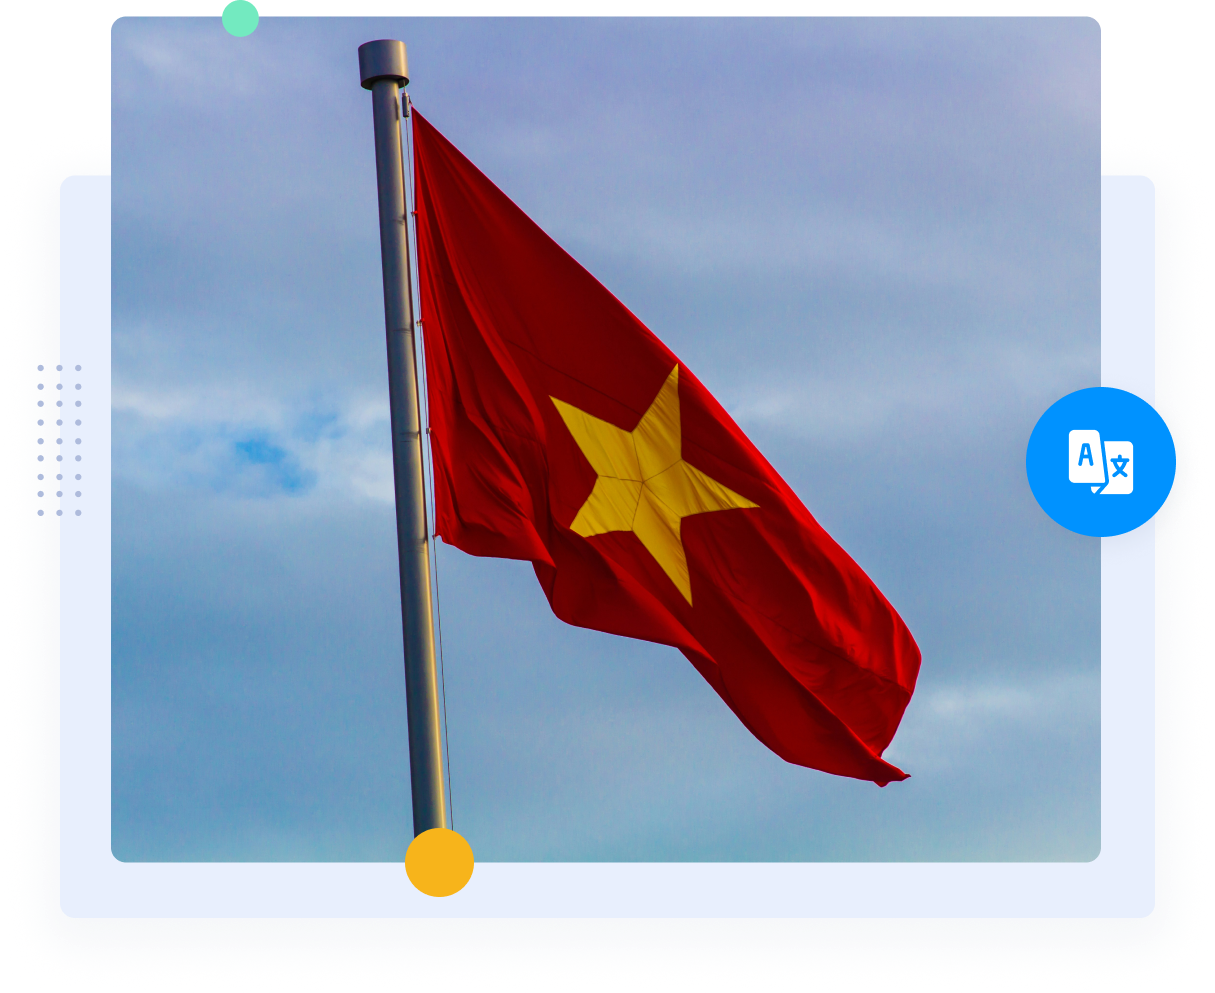 The red flag of Vietnam with yellow star representing Vietnamese-English translations.